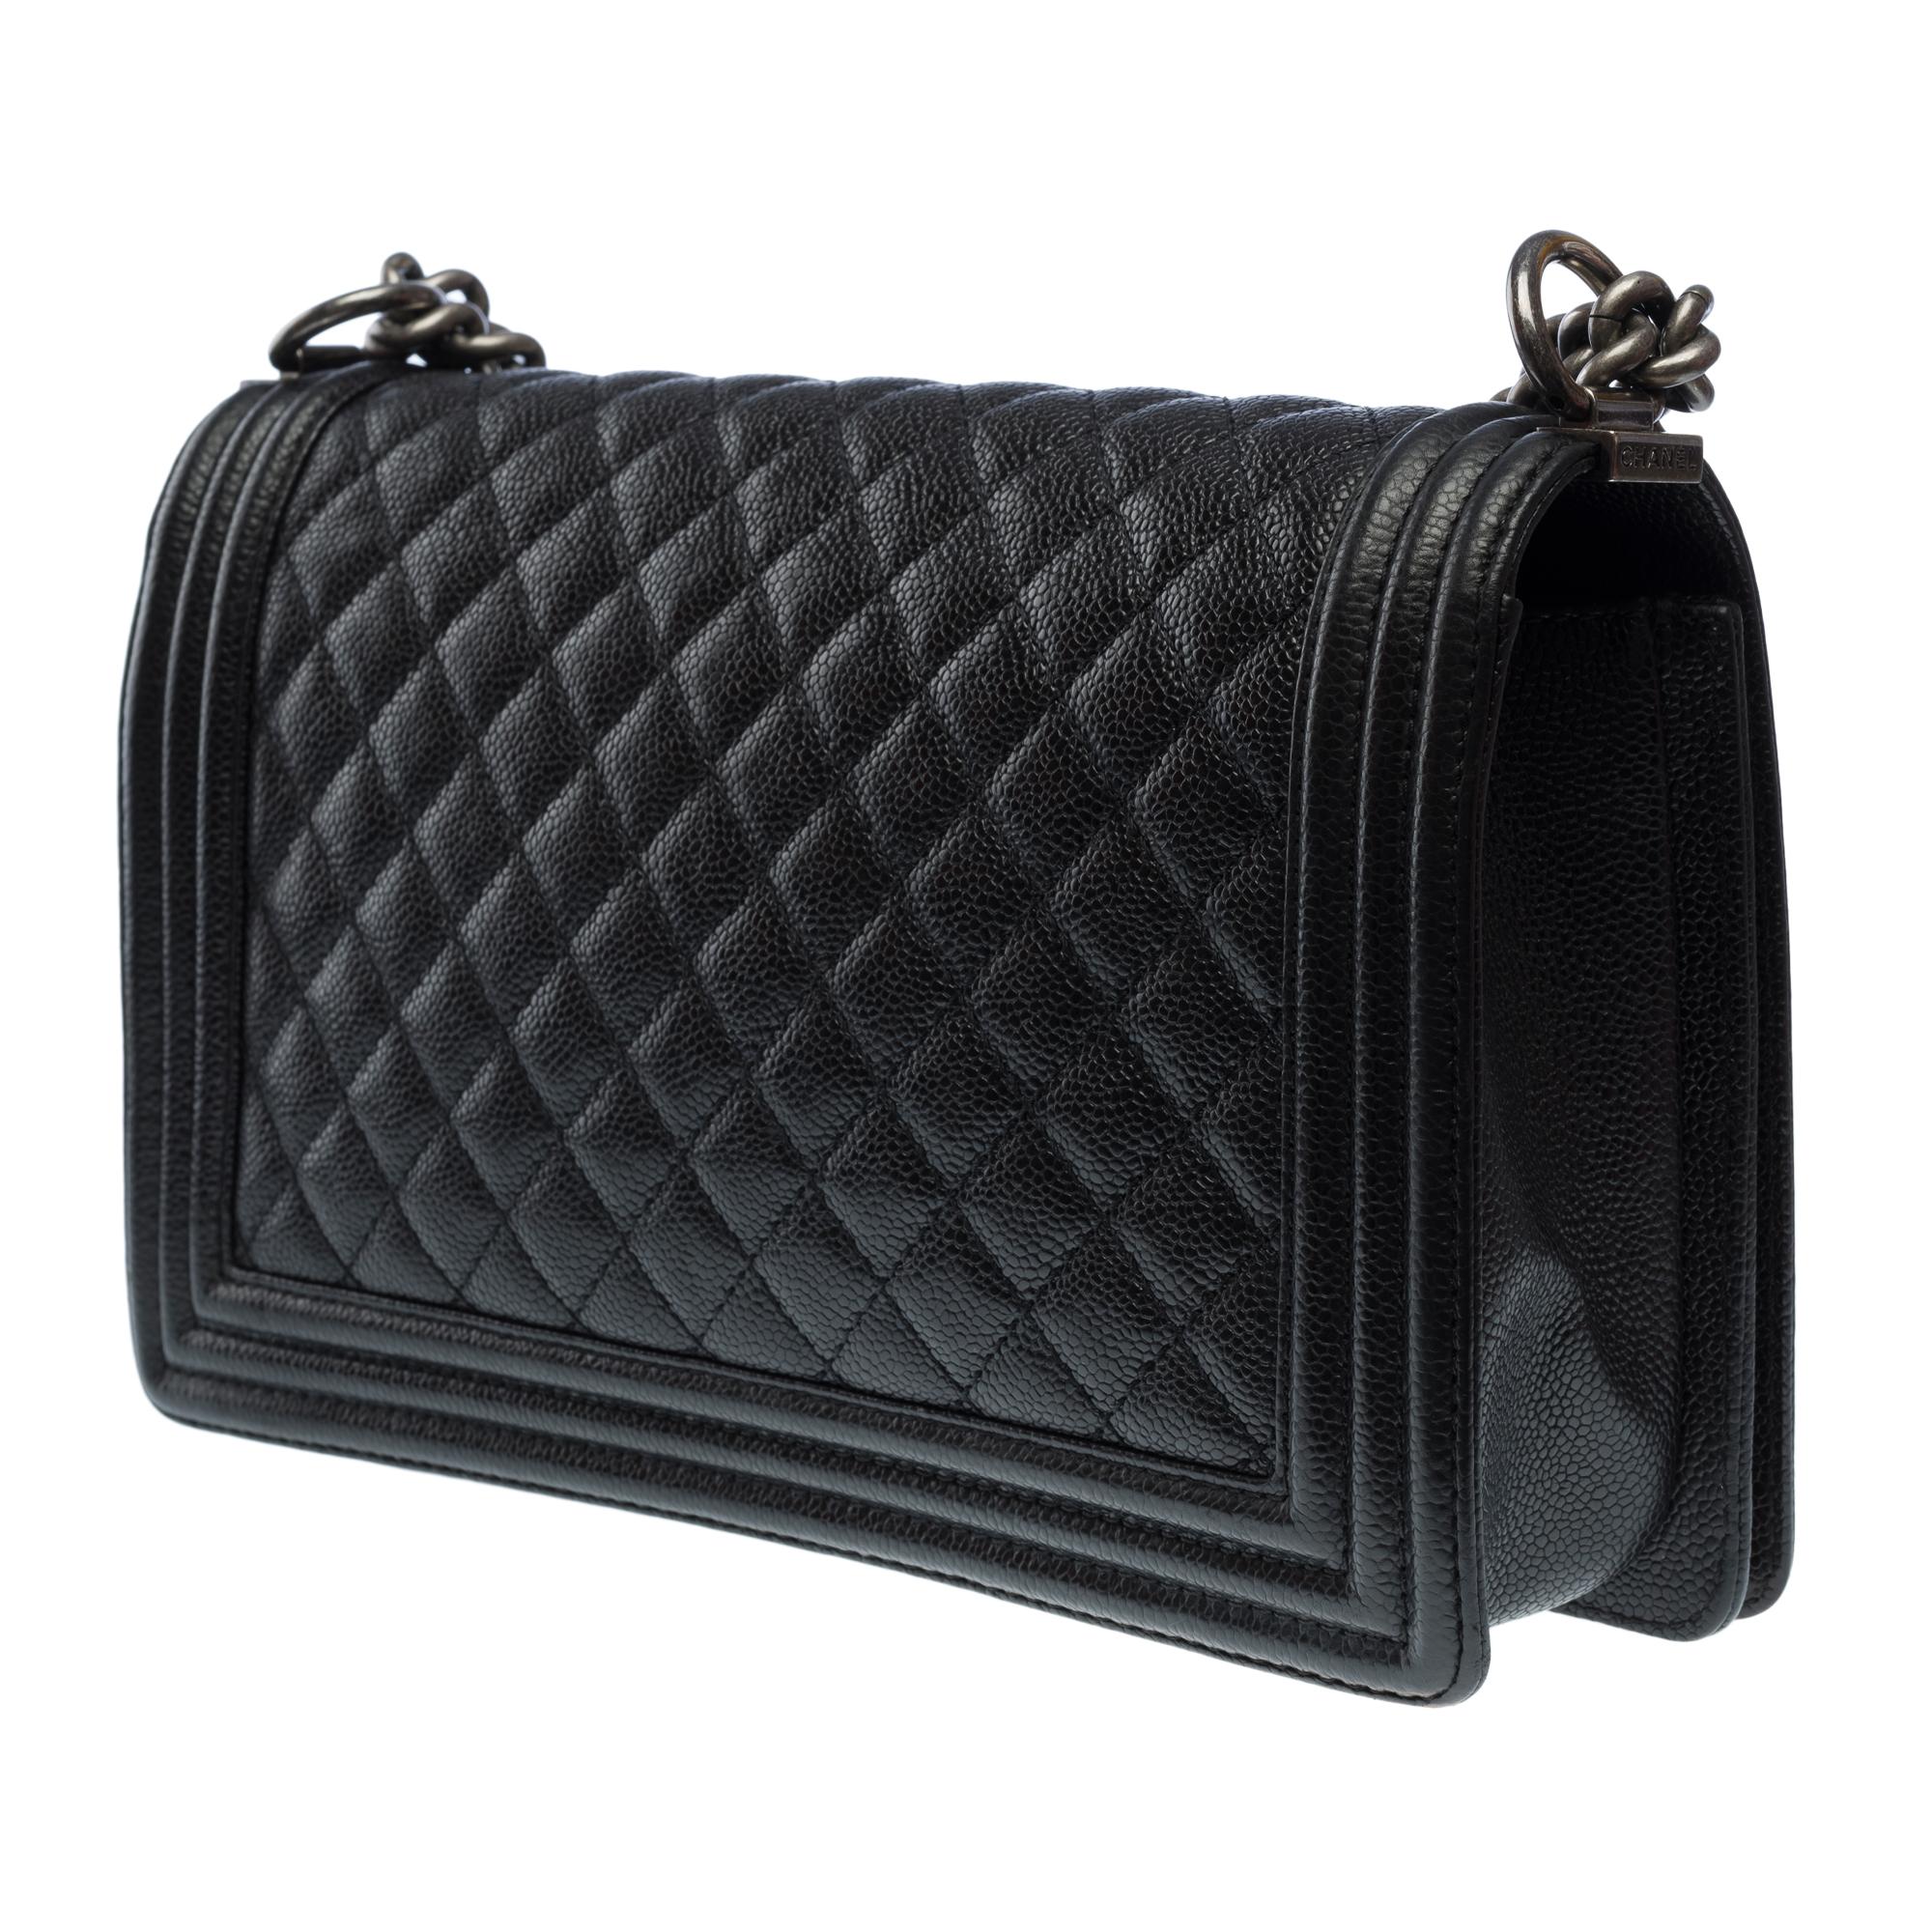 Chanel Boy New medium shoulder bag in black caviar quilted leather, SHW ! For Sale 1